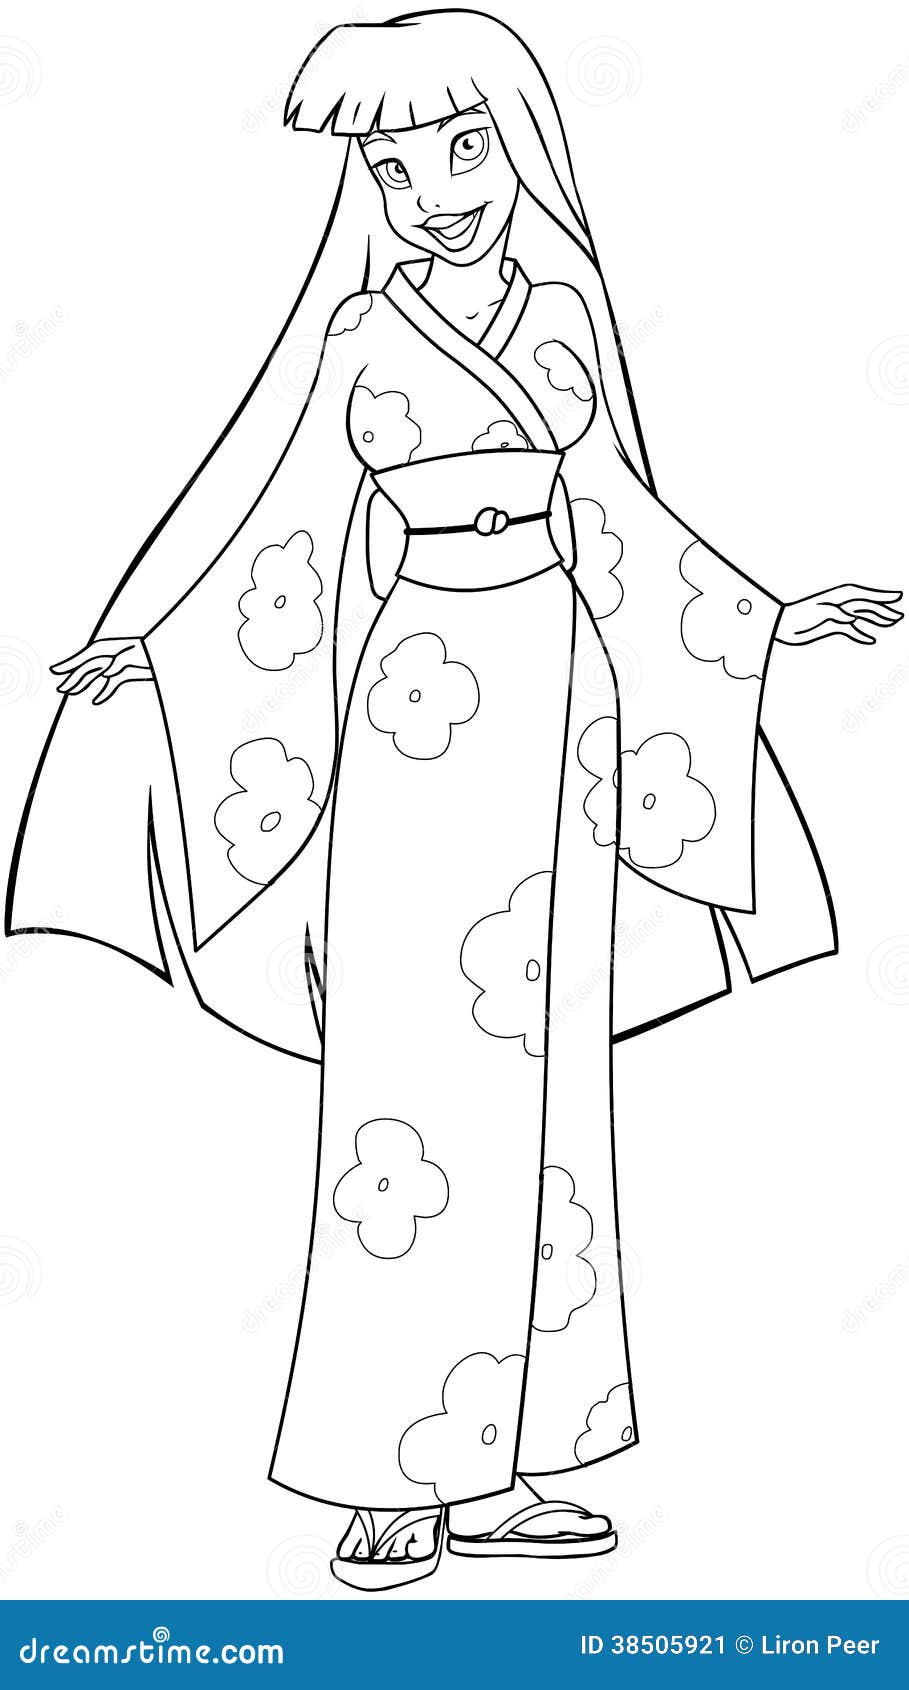 Asian Woman In Kimono Coloring Page Stock Vector - Illustration of